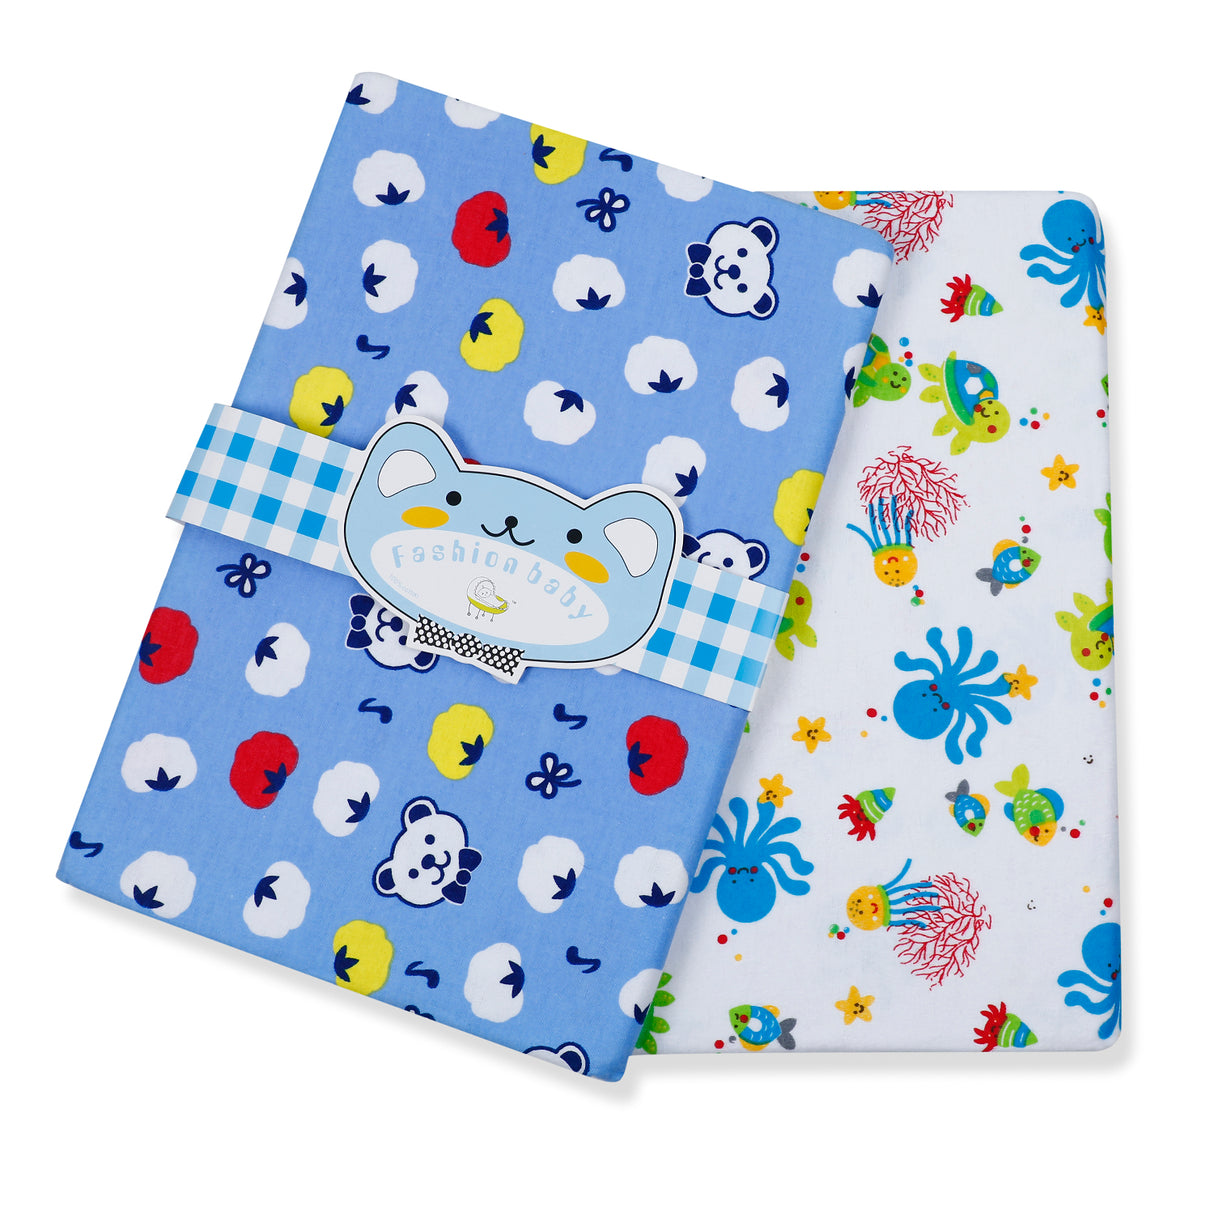 Fashion Baby Soft And Comfort Pack Of 2 Cotton Flalin Wrapper